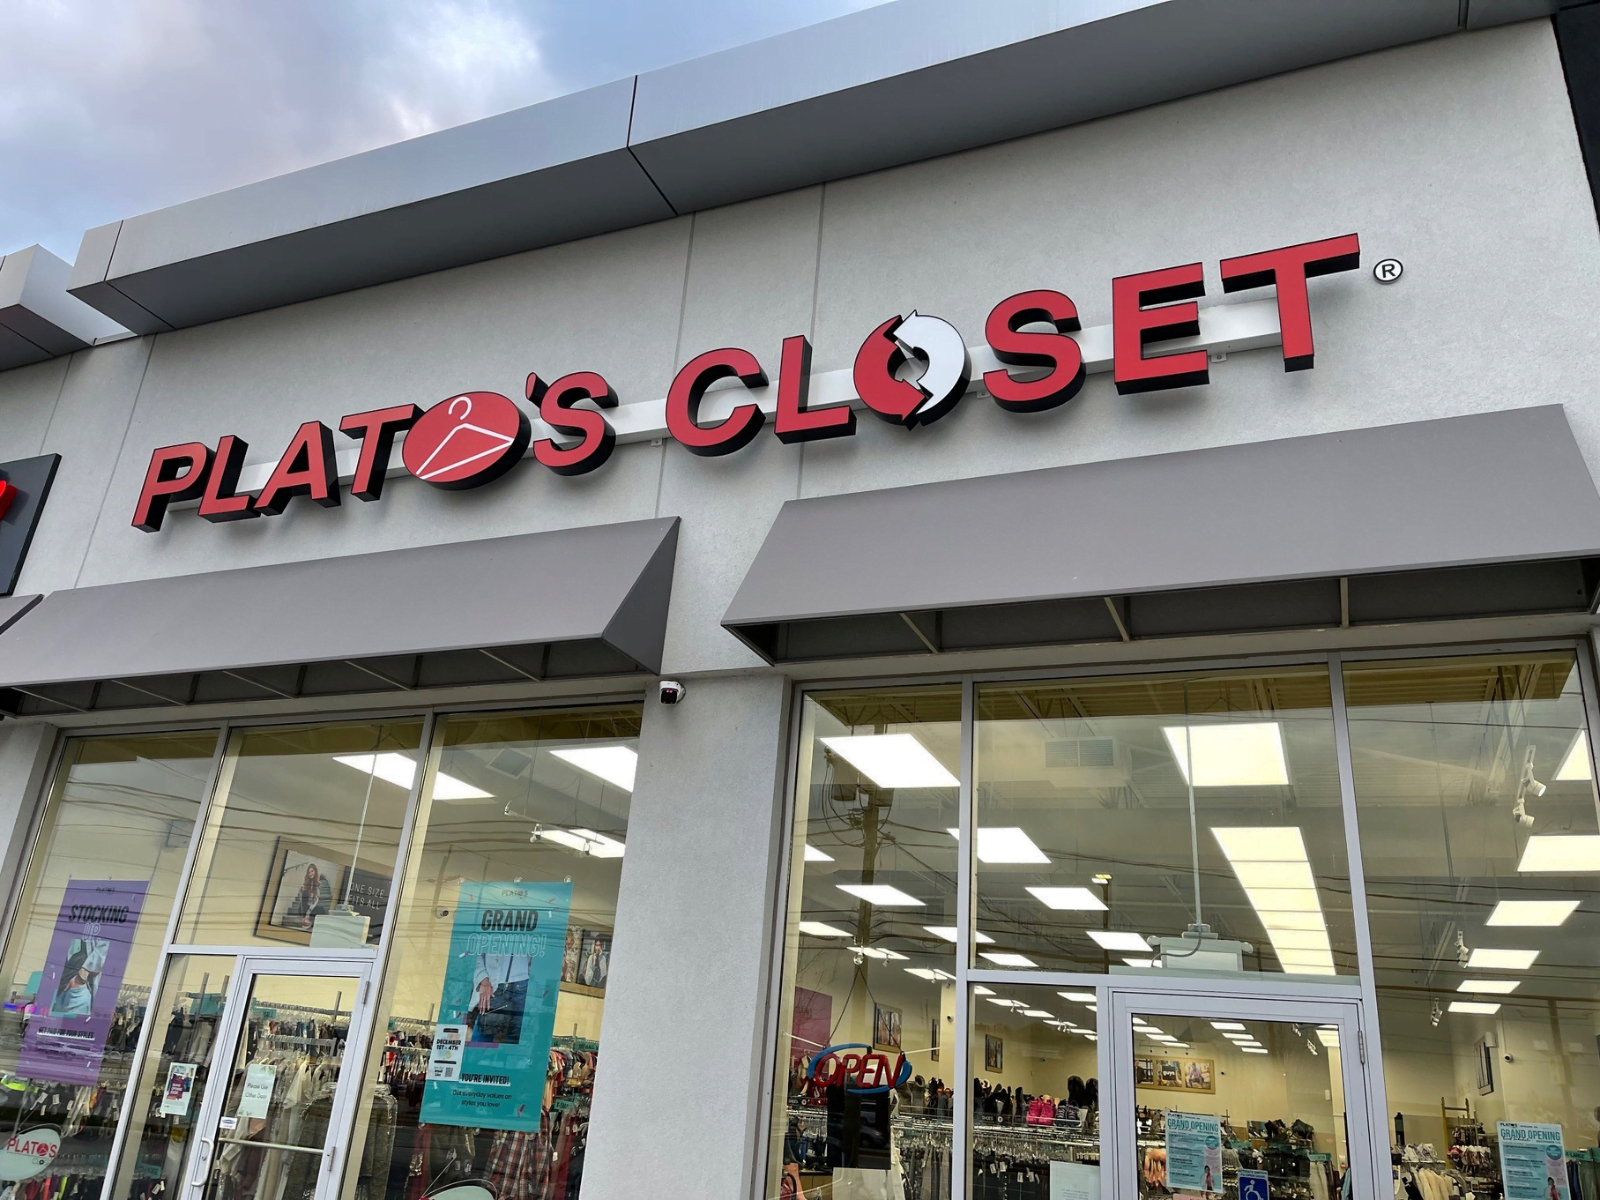 Plato's Closet now open for buying gently-used clothes; sales to